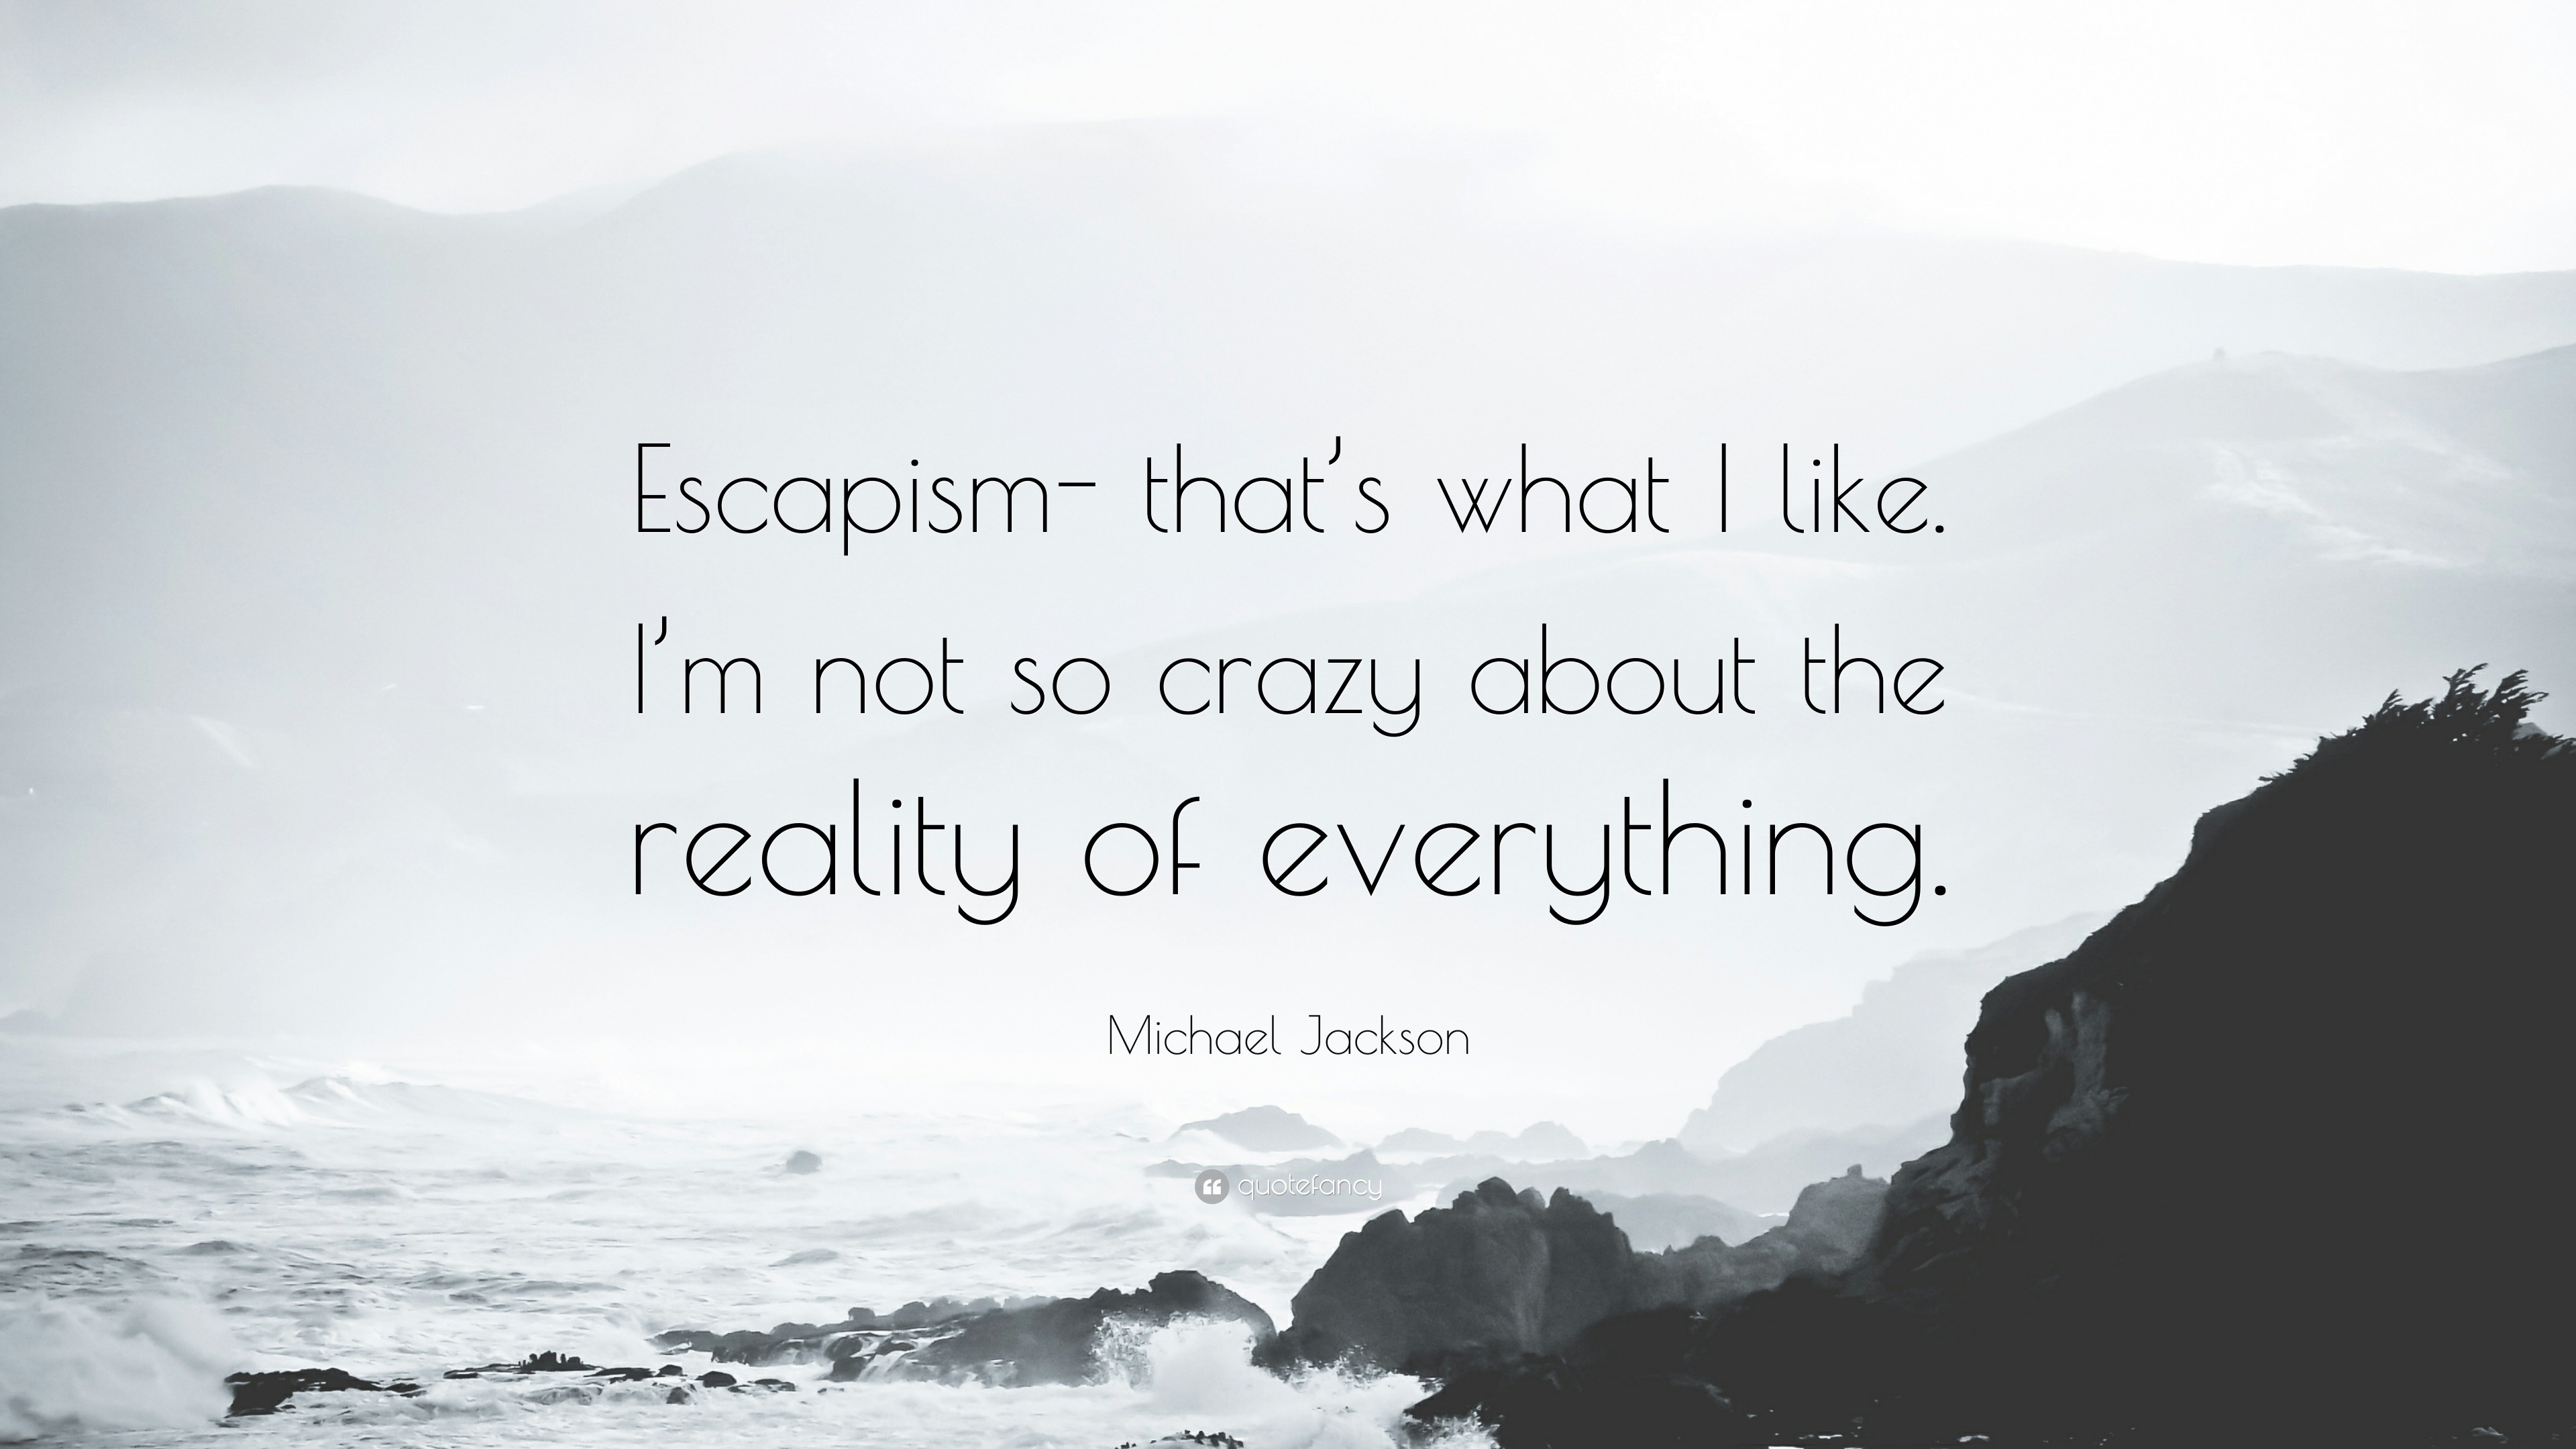 I’m not so crazy about the reality of everything. 